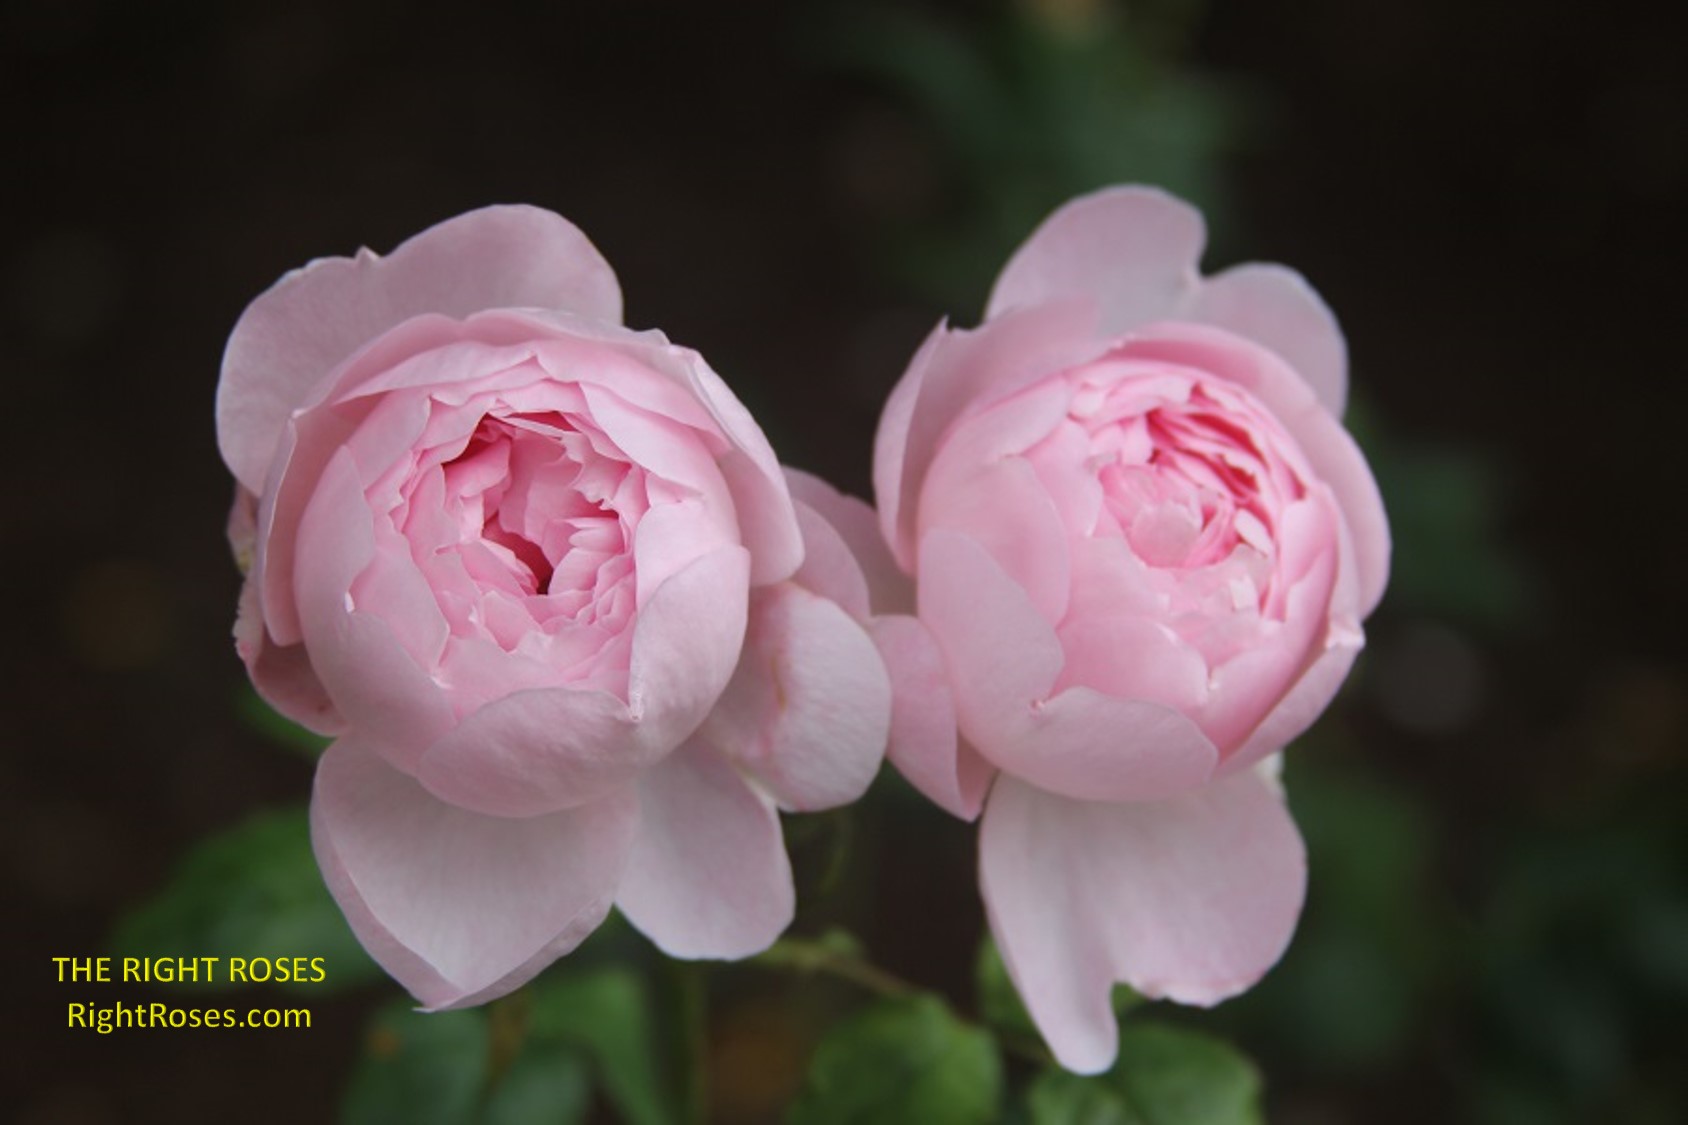 SCEPTER'D ISLE rose review the right roses score best top garden store david austin english roses rose products rose rating the right leap rose food fertilizer